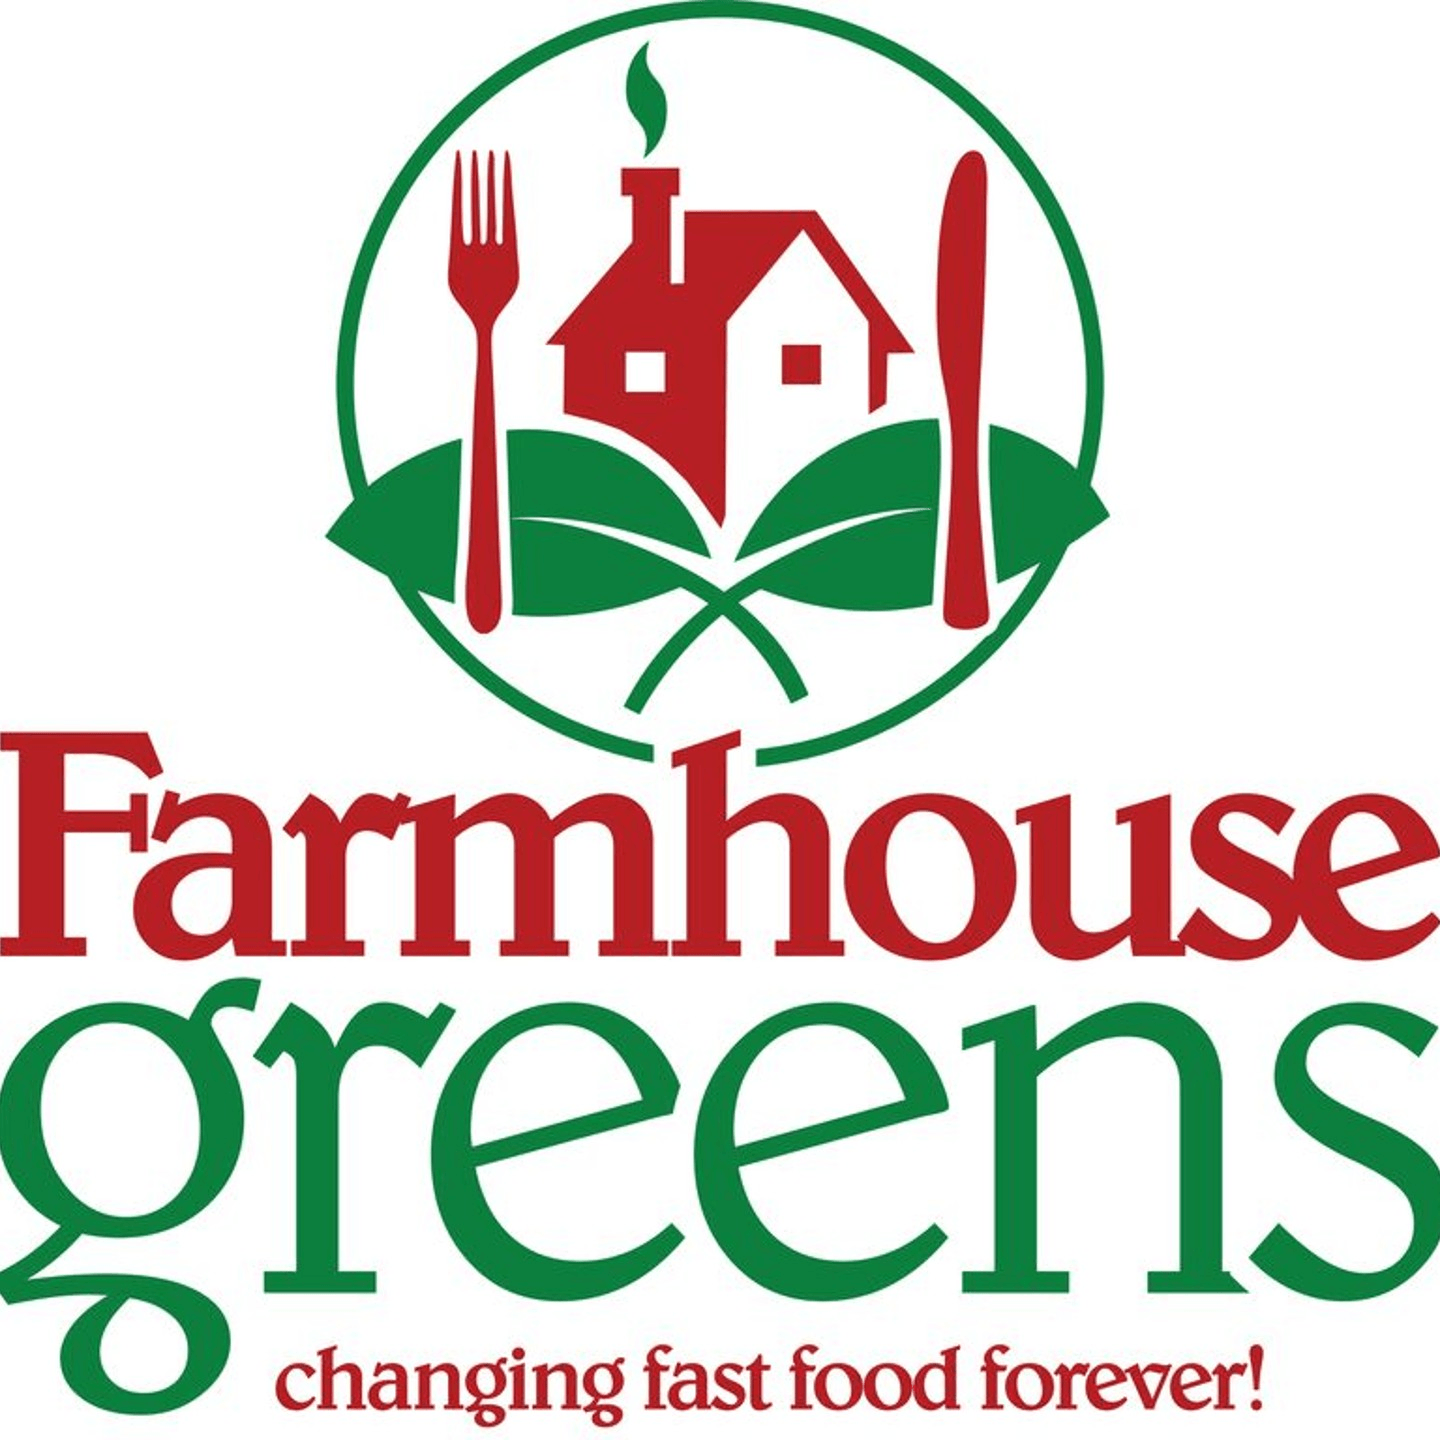 Welcome to Farmhouse Greens